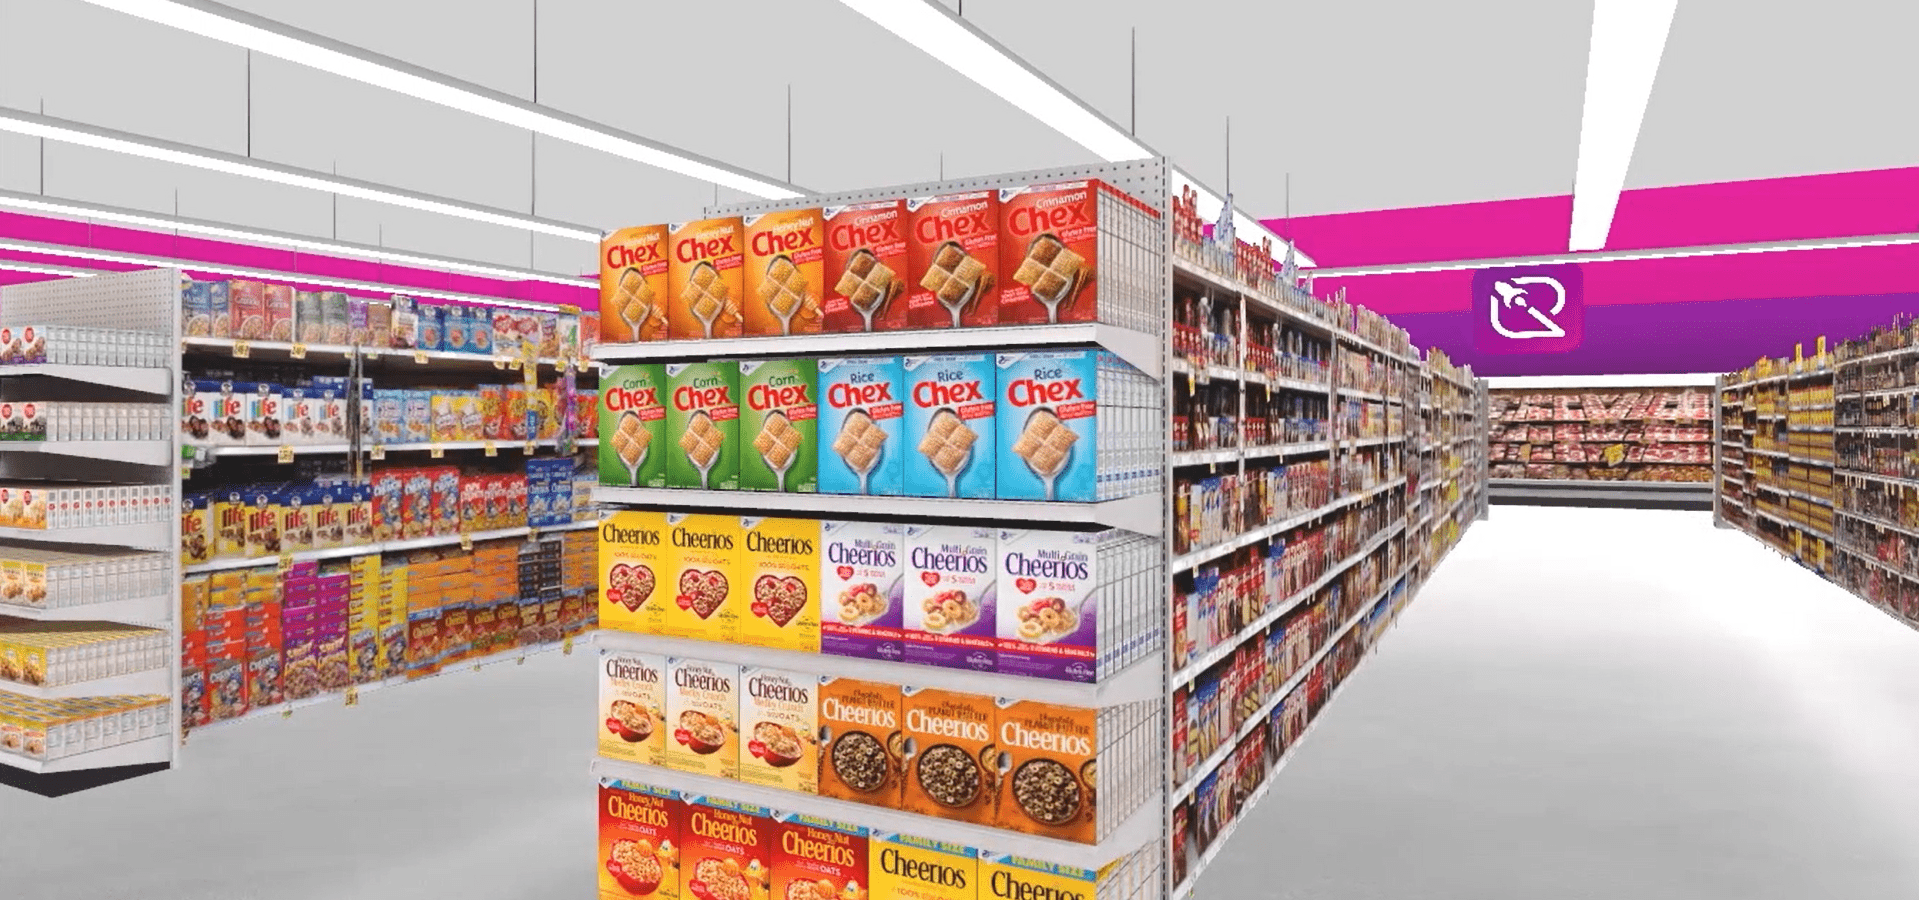 3D rendering of a grocery store